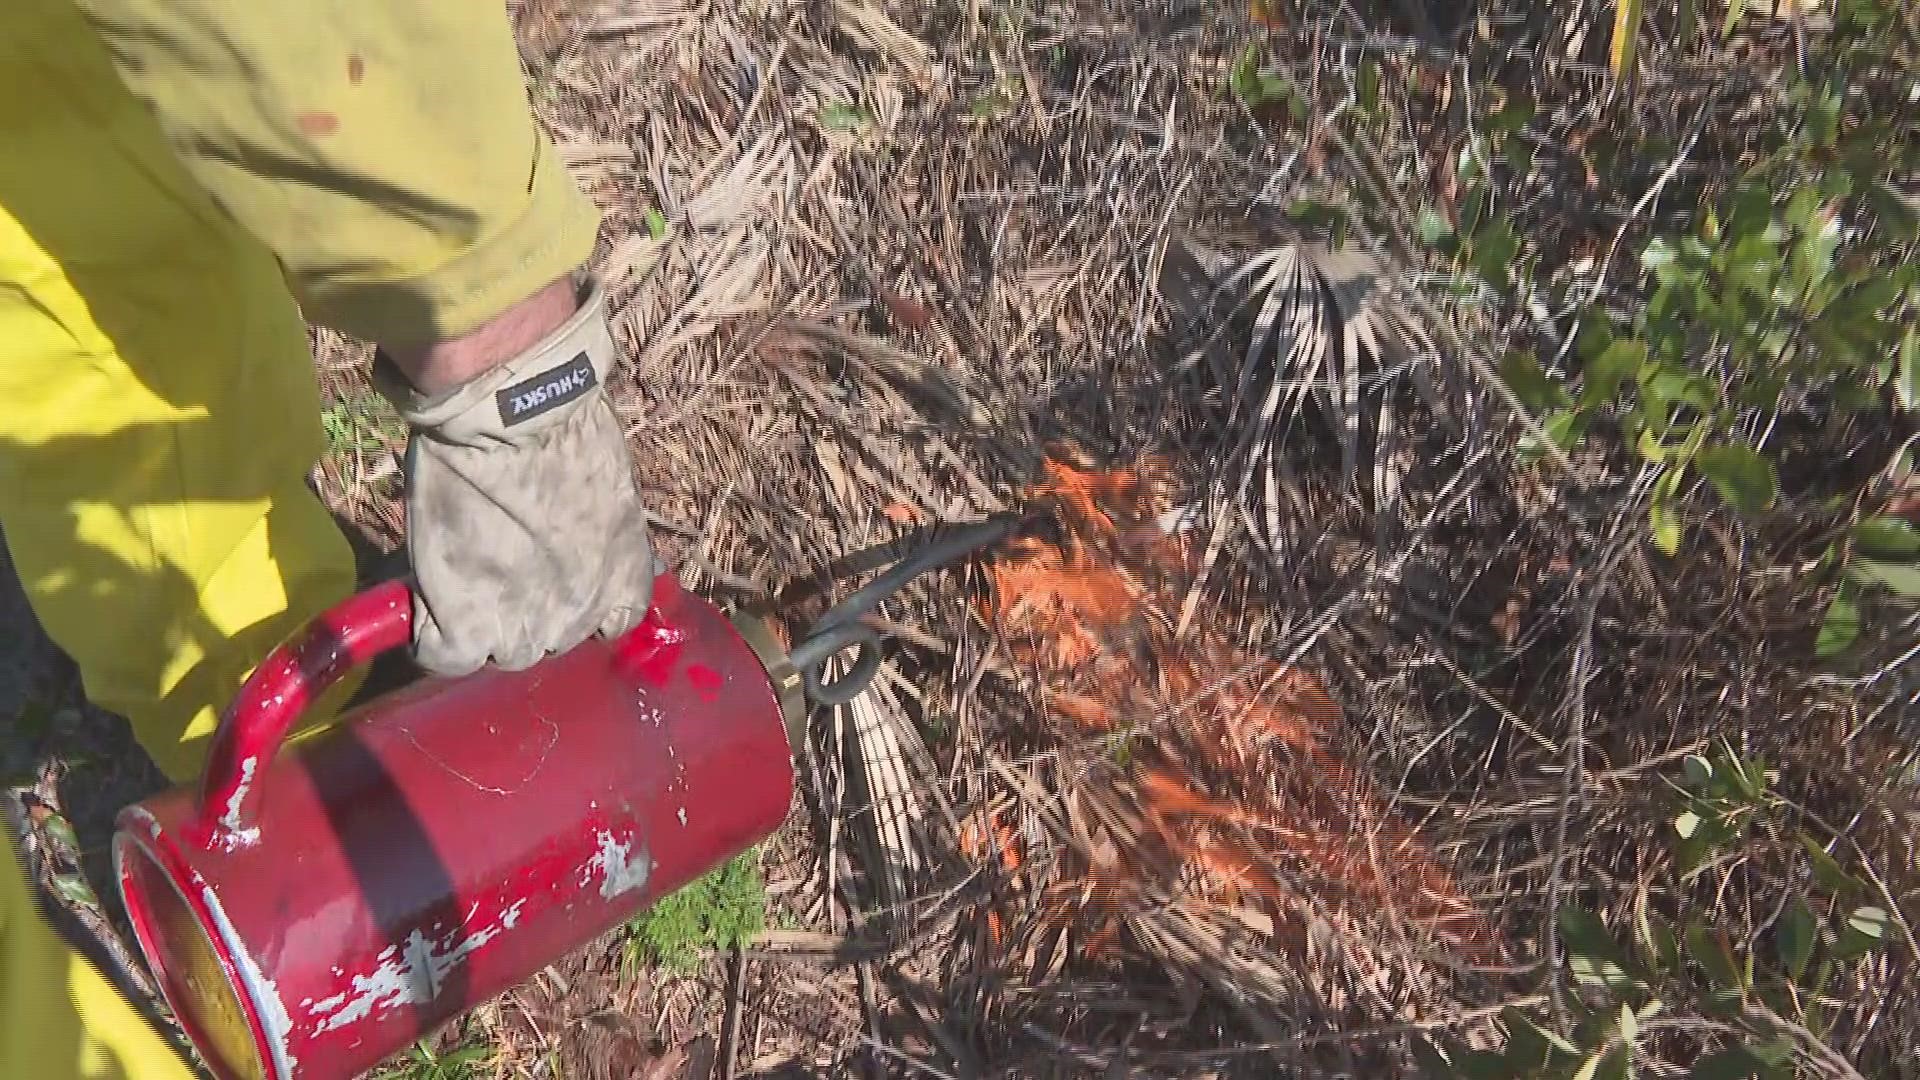 County officials say the event aims to show the significance of prescribed fires to Florida’s ecosystem.